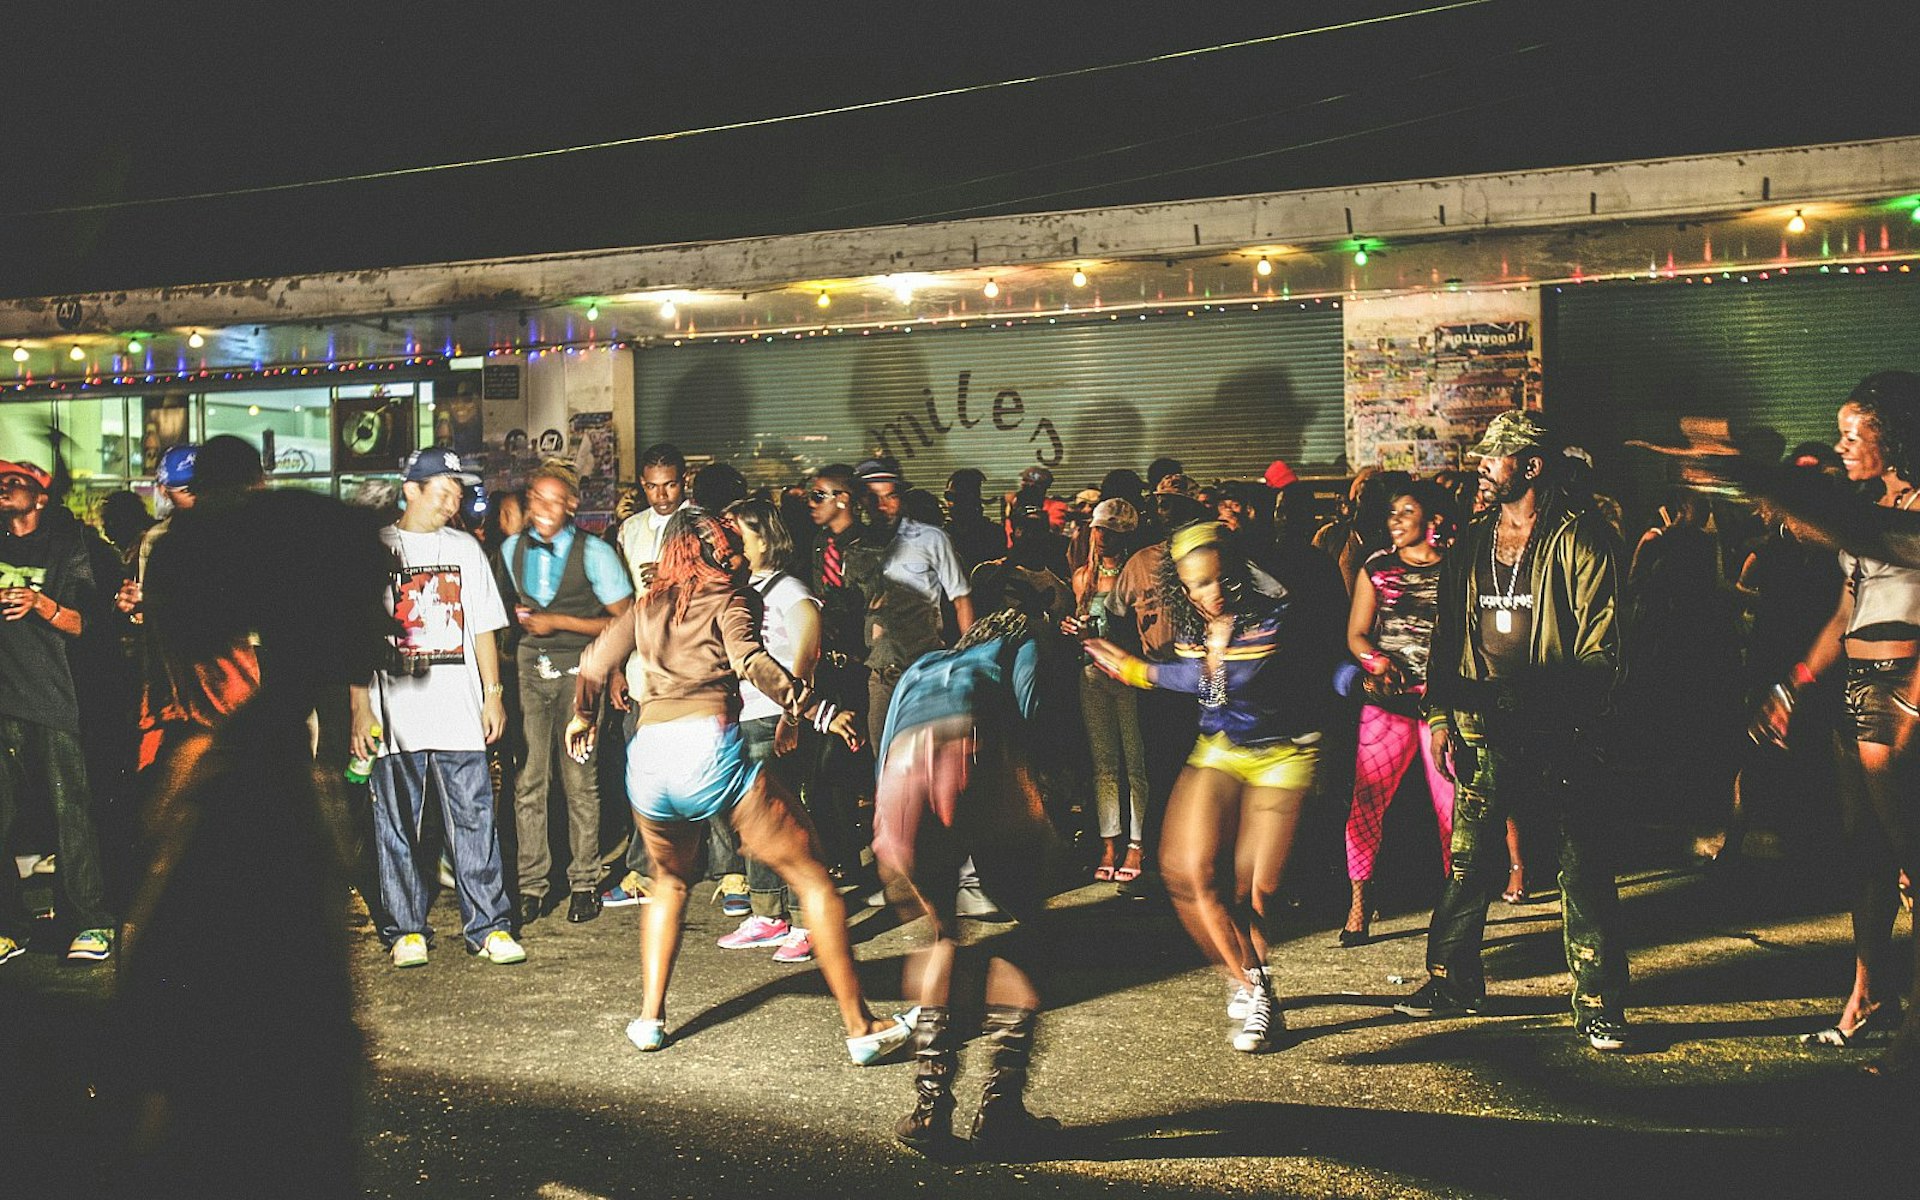 A group of people dancing in the street in Kingston, Jamaica, at night-time, next to a shuttered shop.